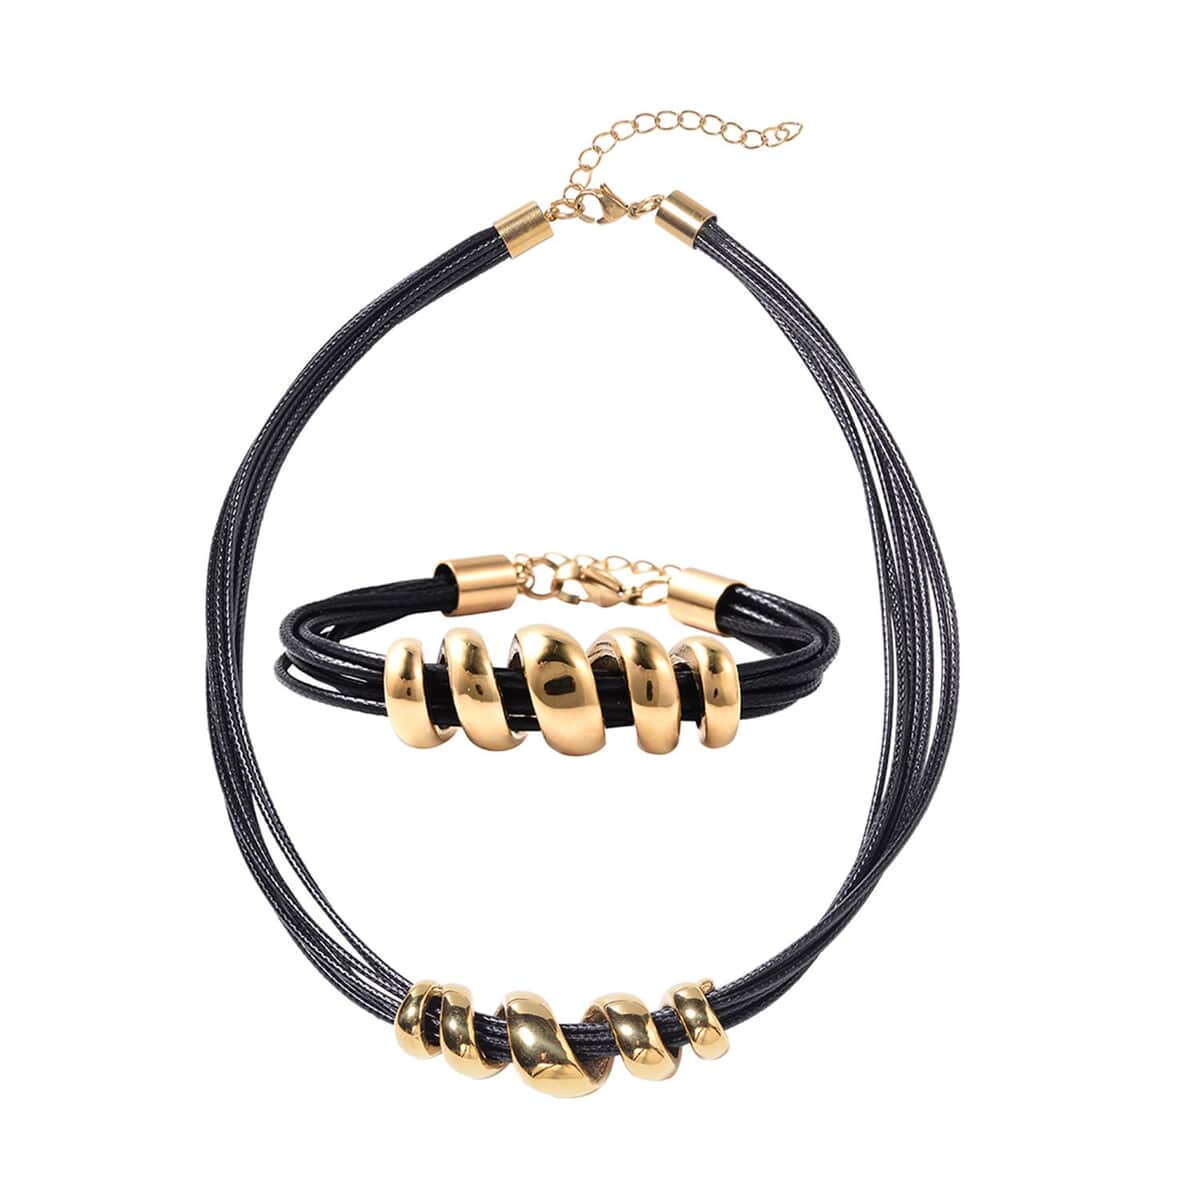 Black Faux Leather Cord Twist Bracelet (7-8.50In) and Necklace (16-18In) in ION Plated YG Stainless Steel image number 0